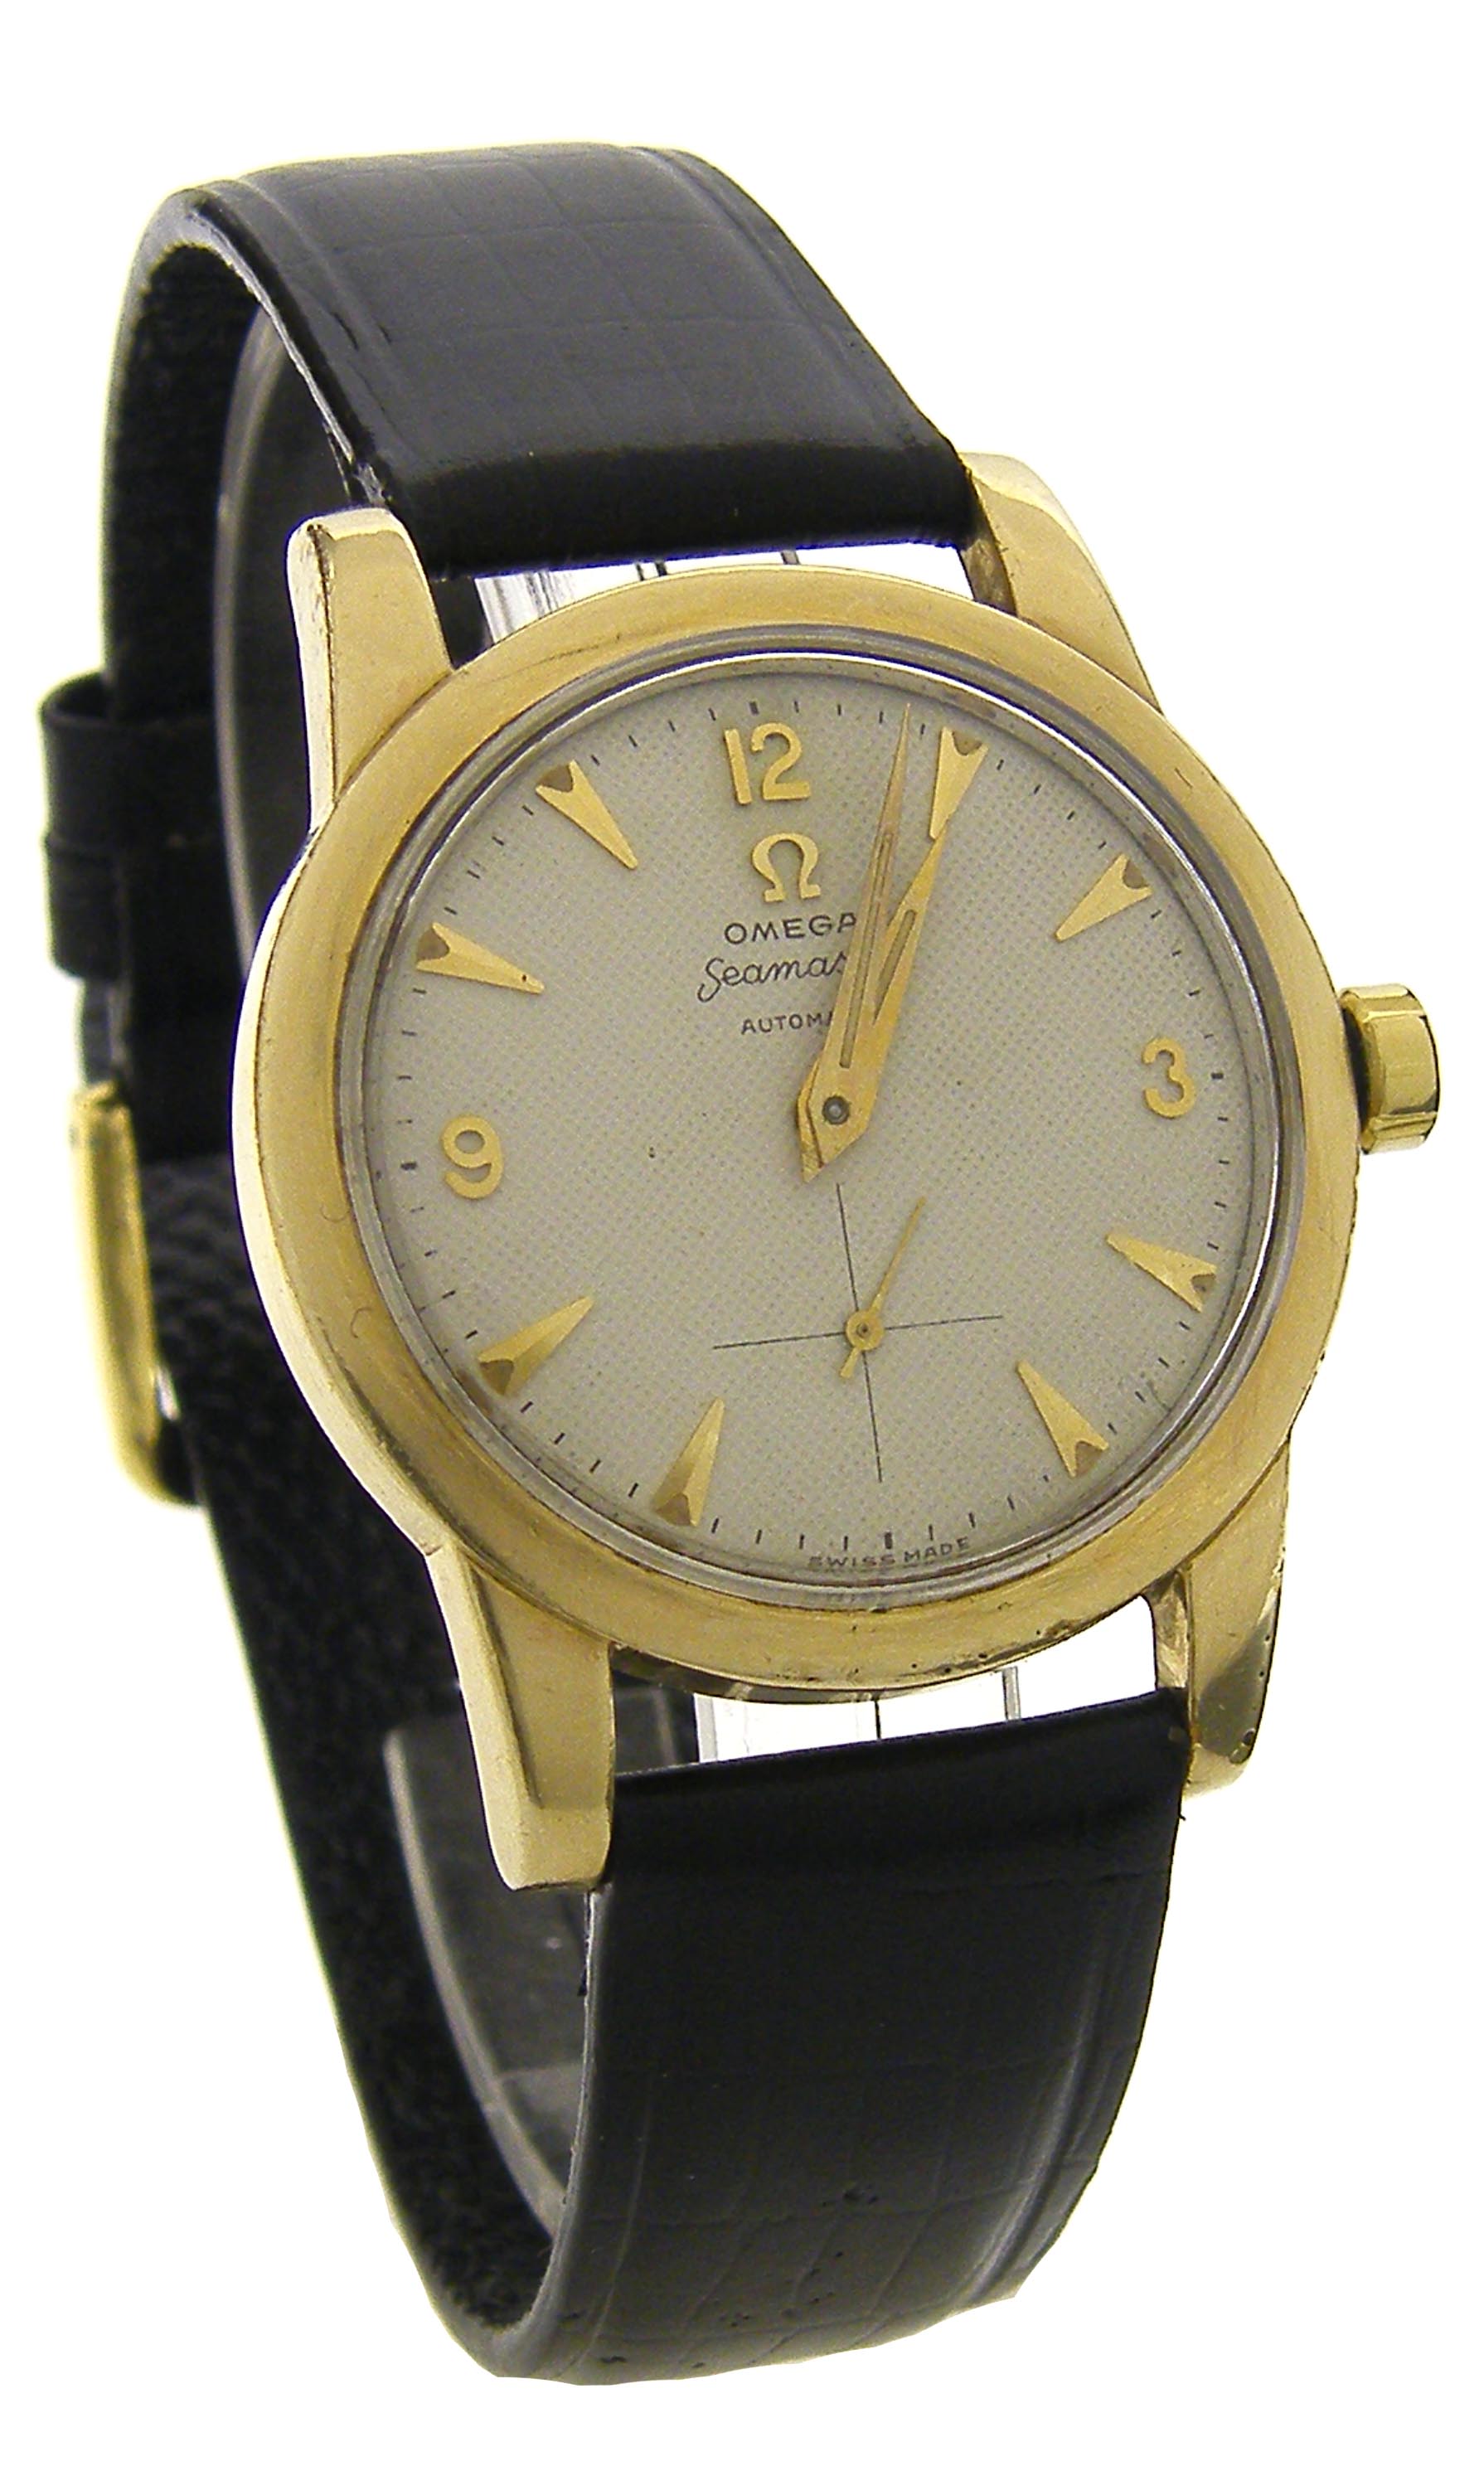 Omega Seamaster automatic gold capped stainless steel gentleman`s wristwatch, the textured dial with